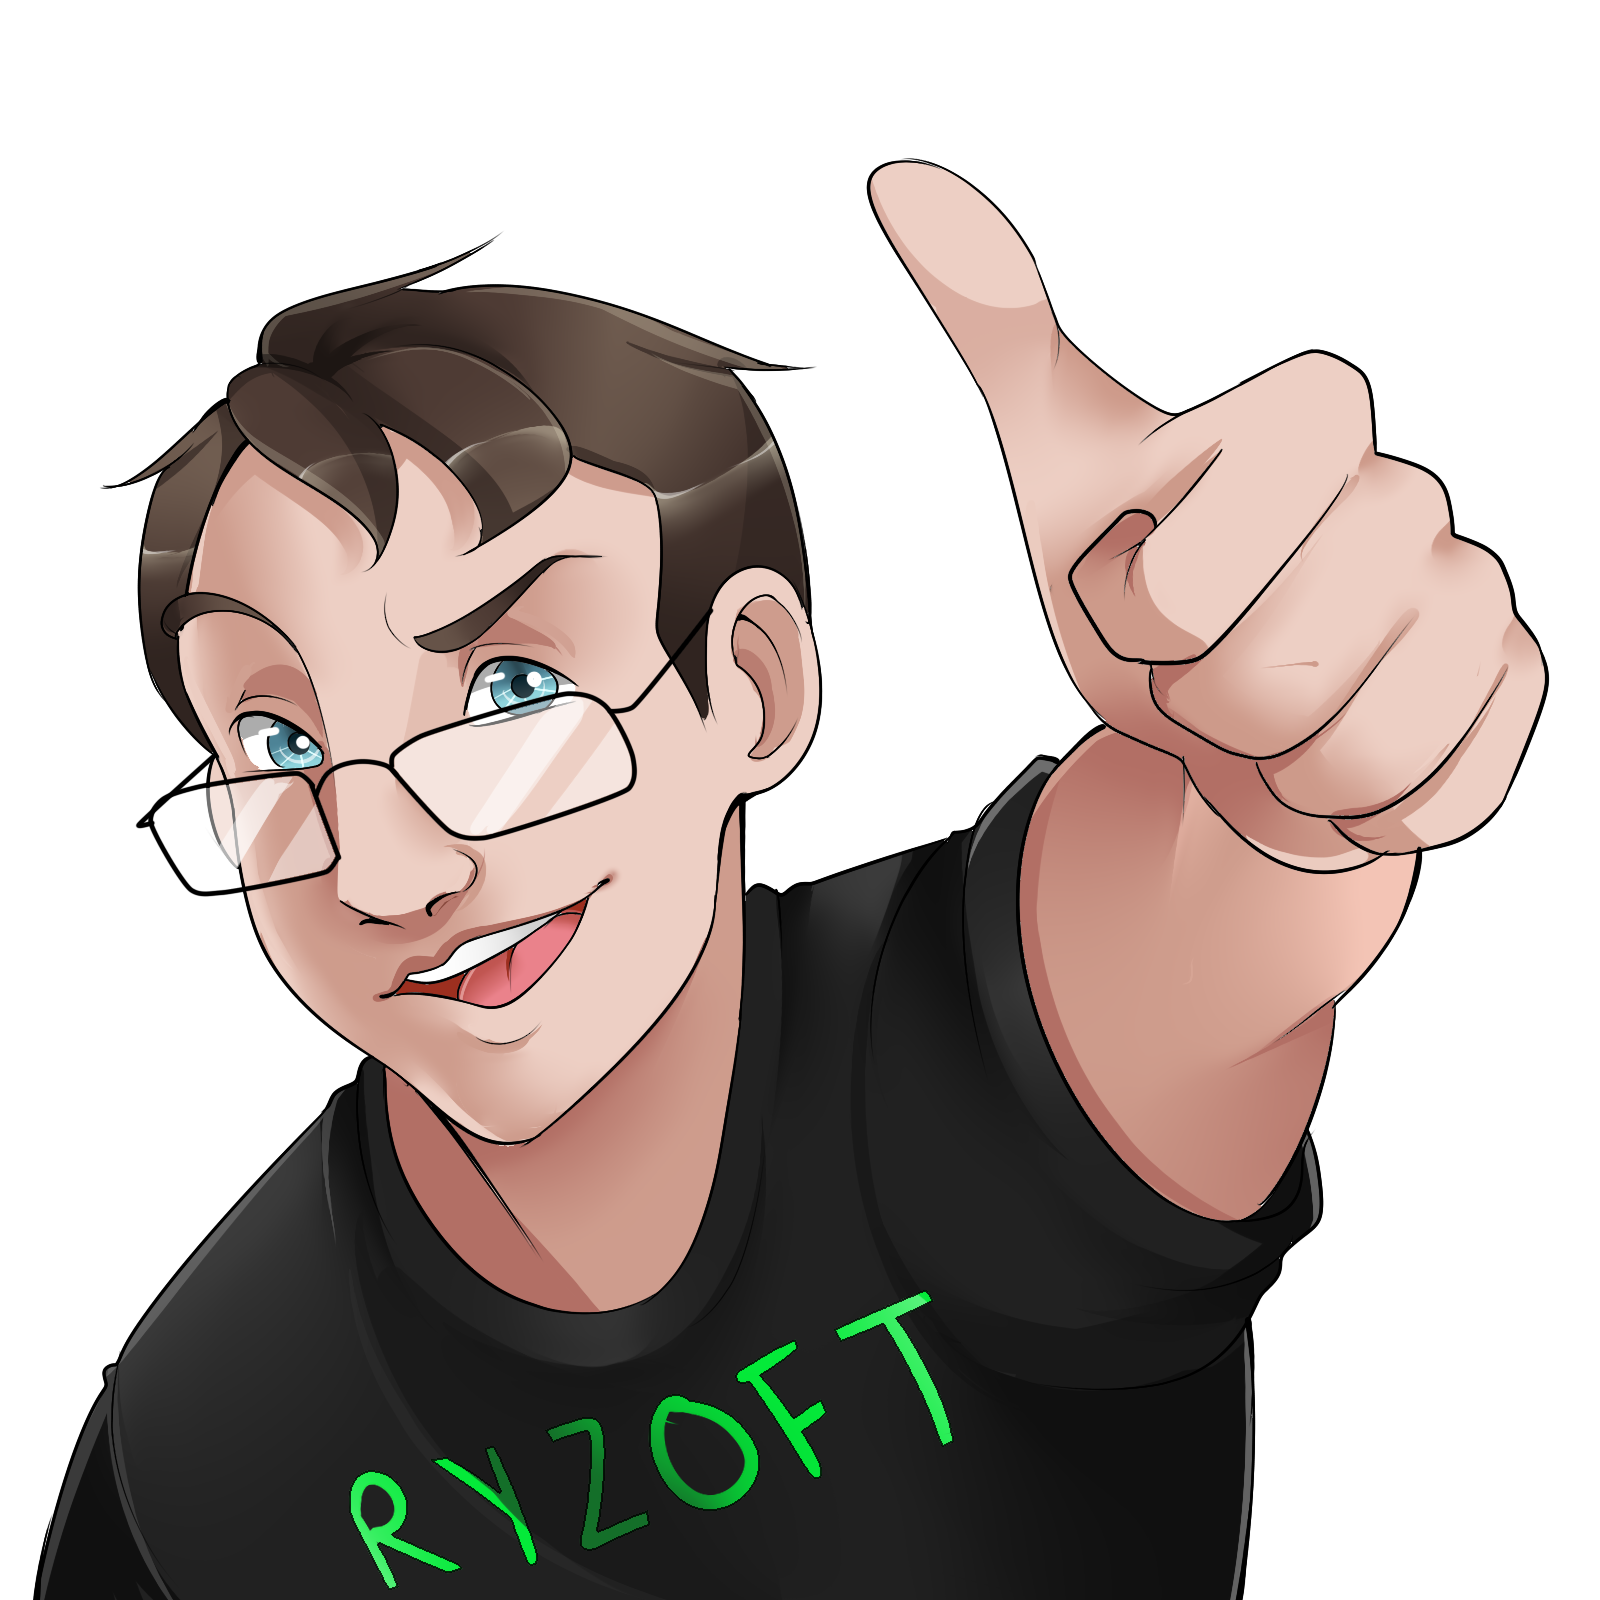 Ryzoft On Twitter My Profile Pic Is Me But Inspired By You 3